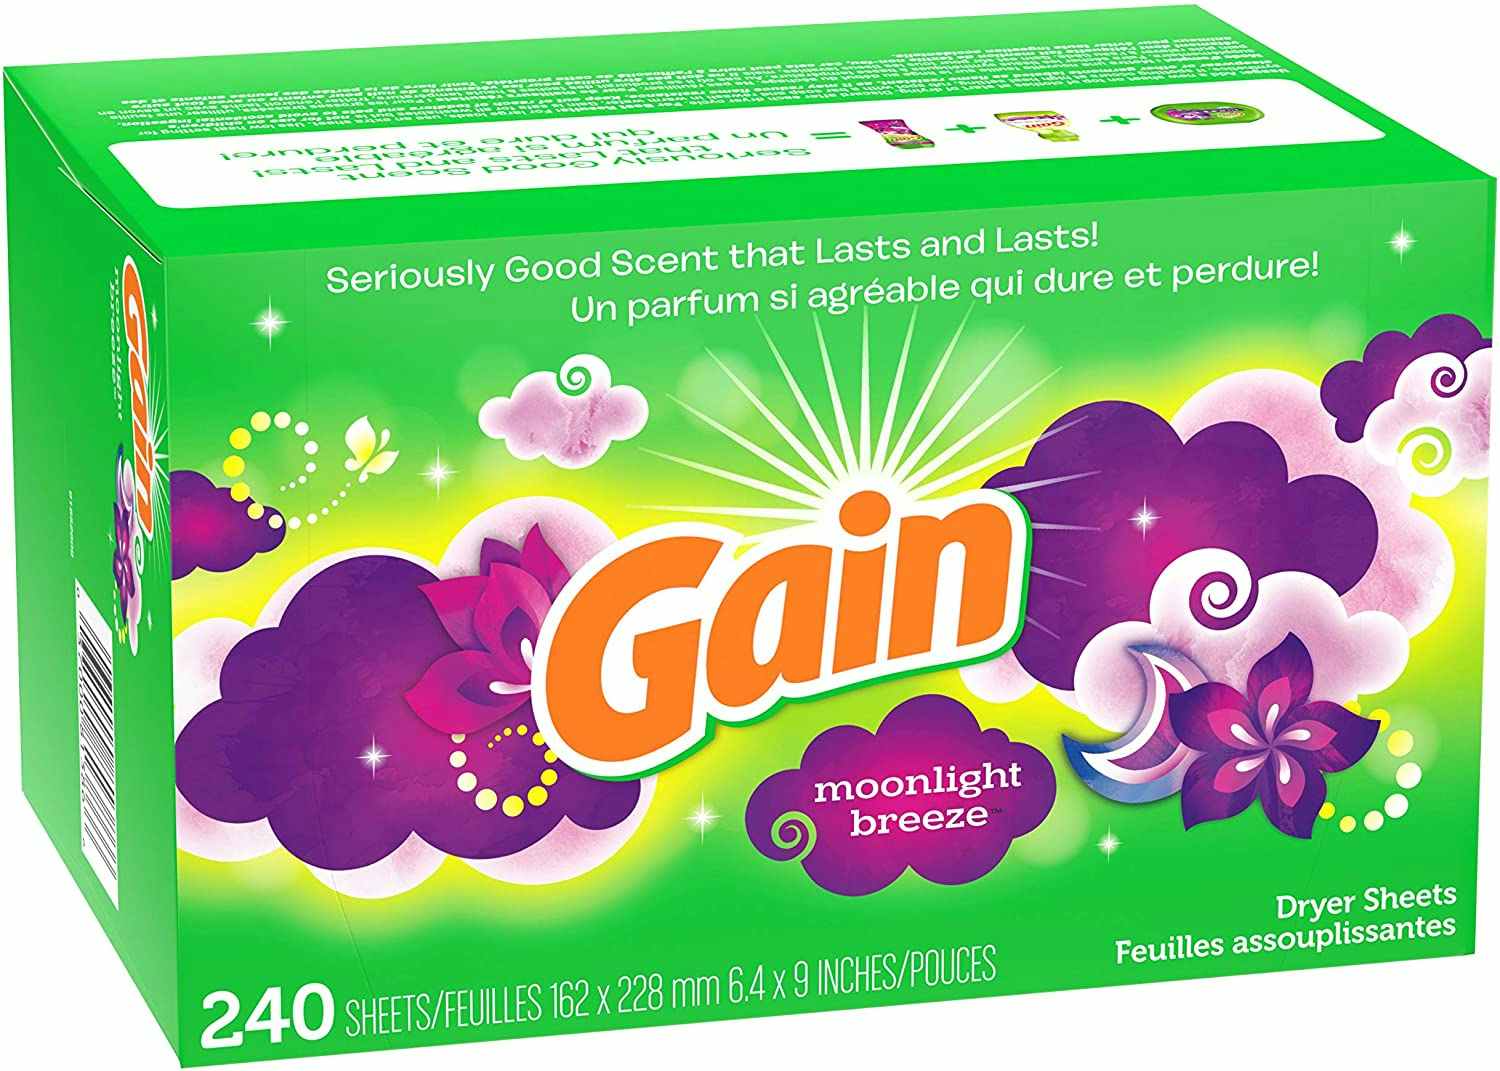 A box of Gain dryer sheets.